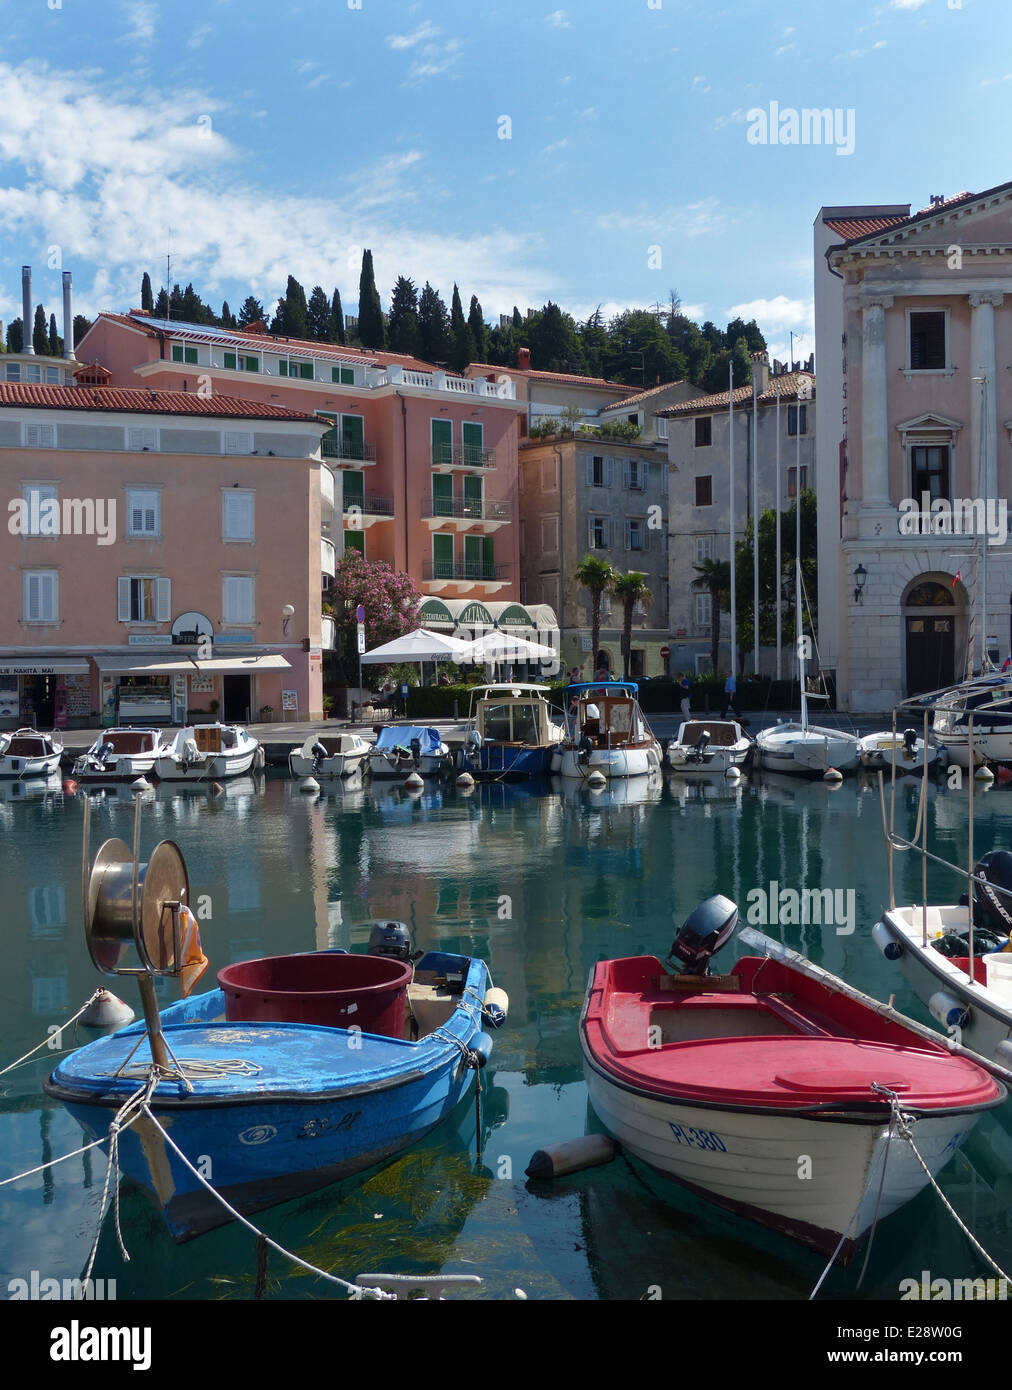 The harbour or marina in Piran, Slovenia with red and blue boats Stock Photo